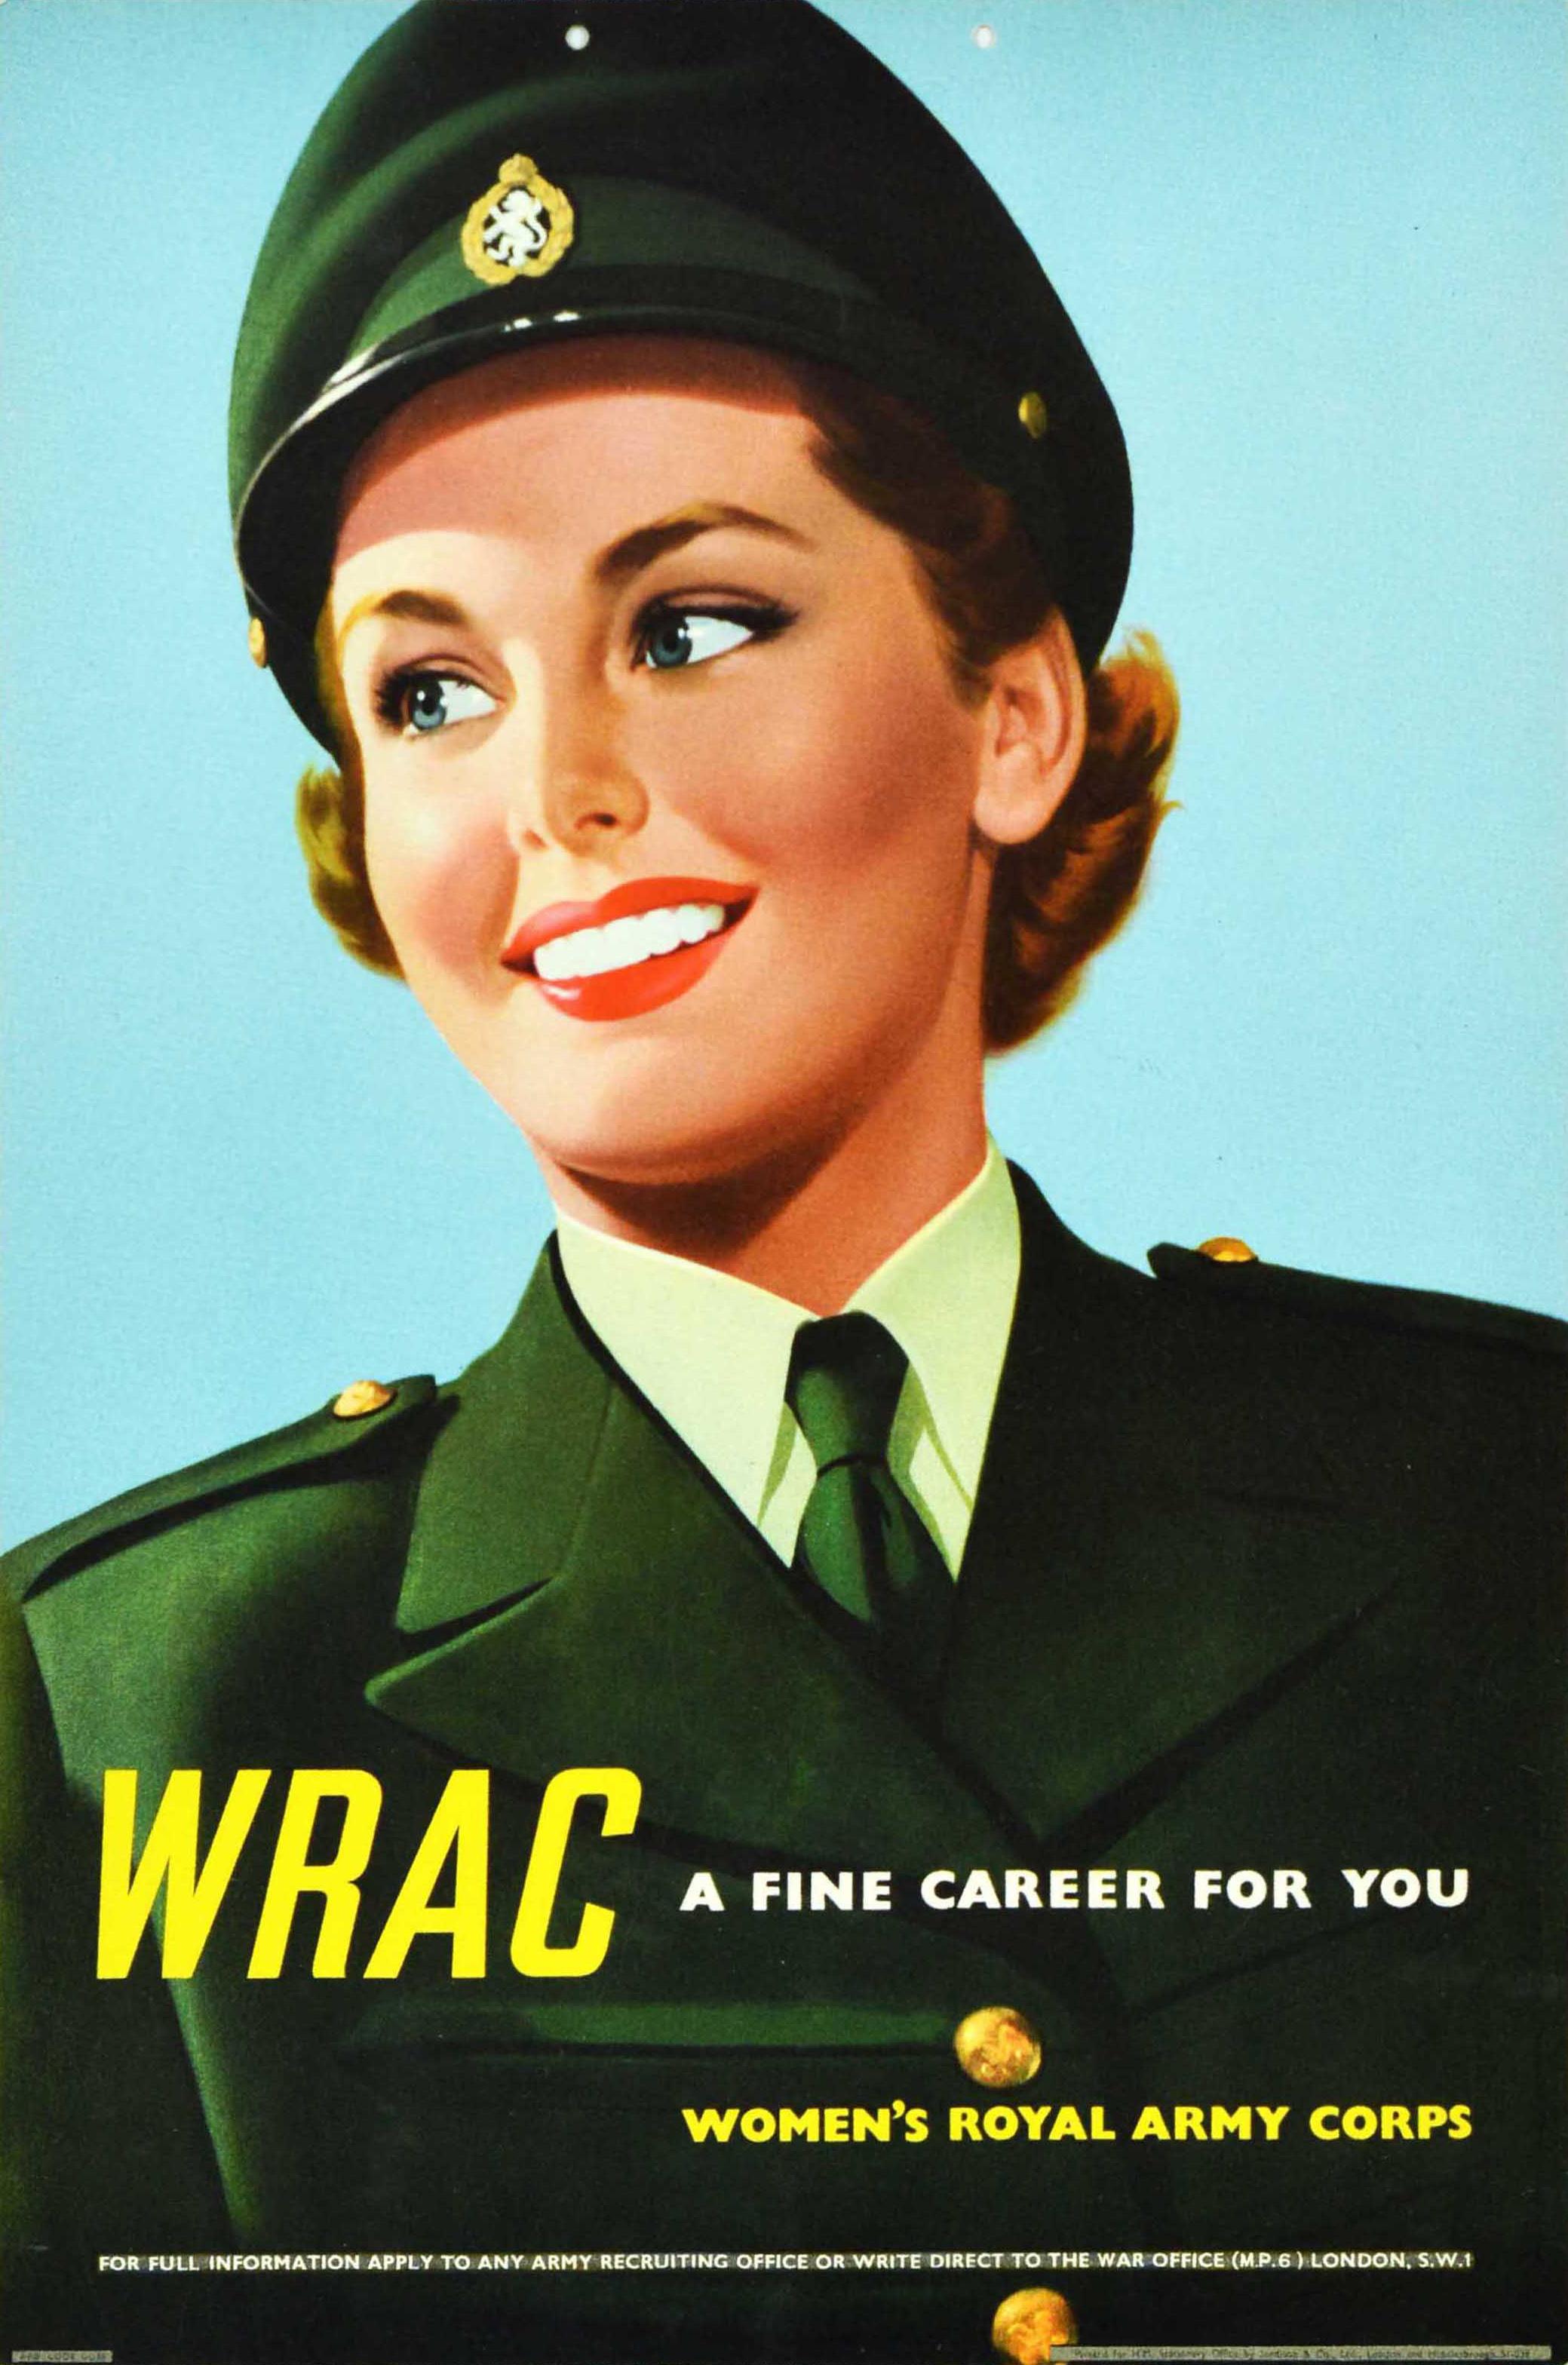 Original Vintage Military Poster WRAC A Fine Career Women's Royal Army Corps UK